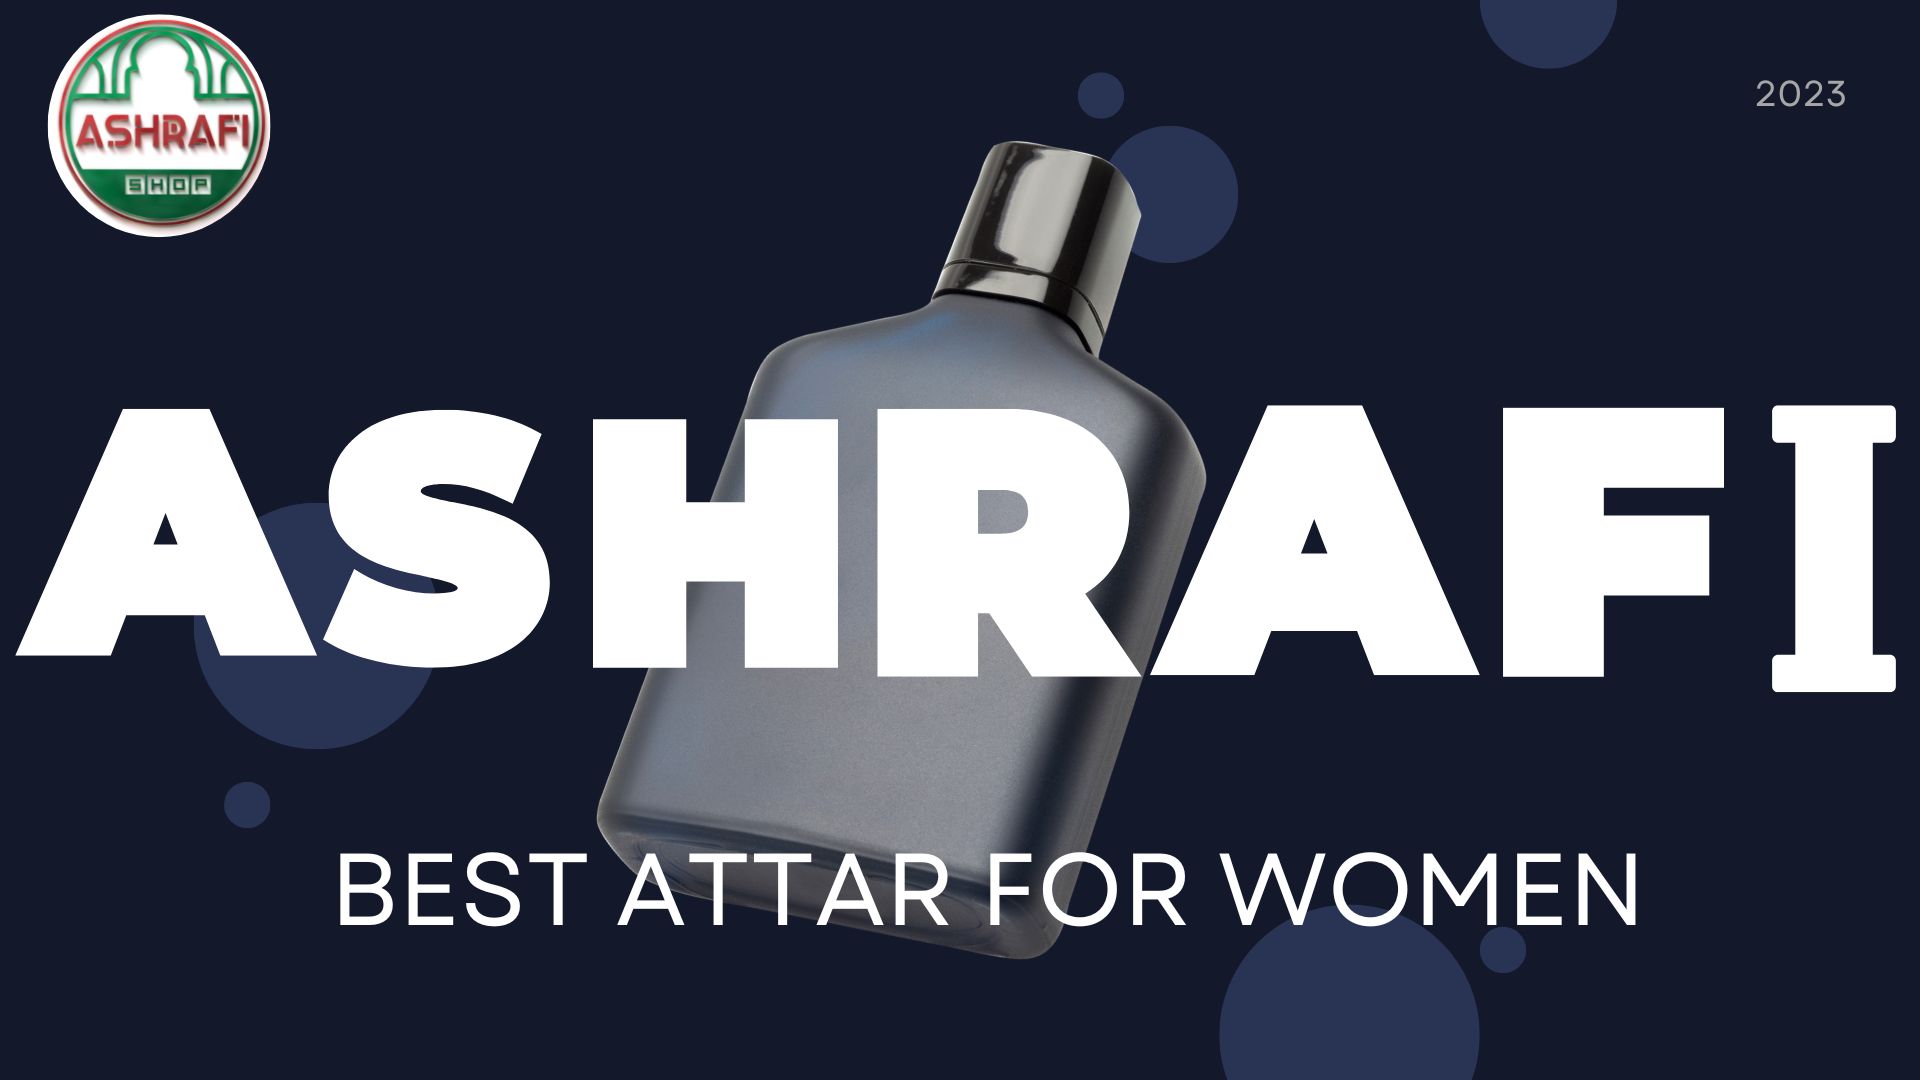 Discover the Top 5 Best Attars for Women in 2023